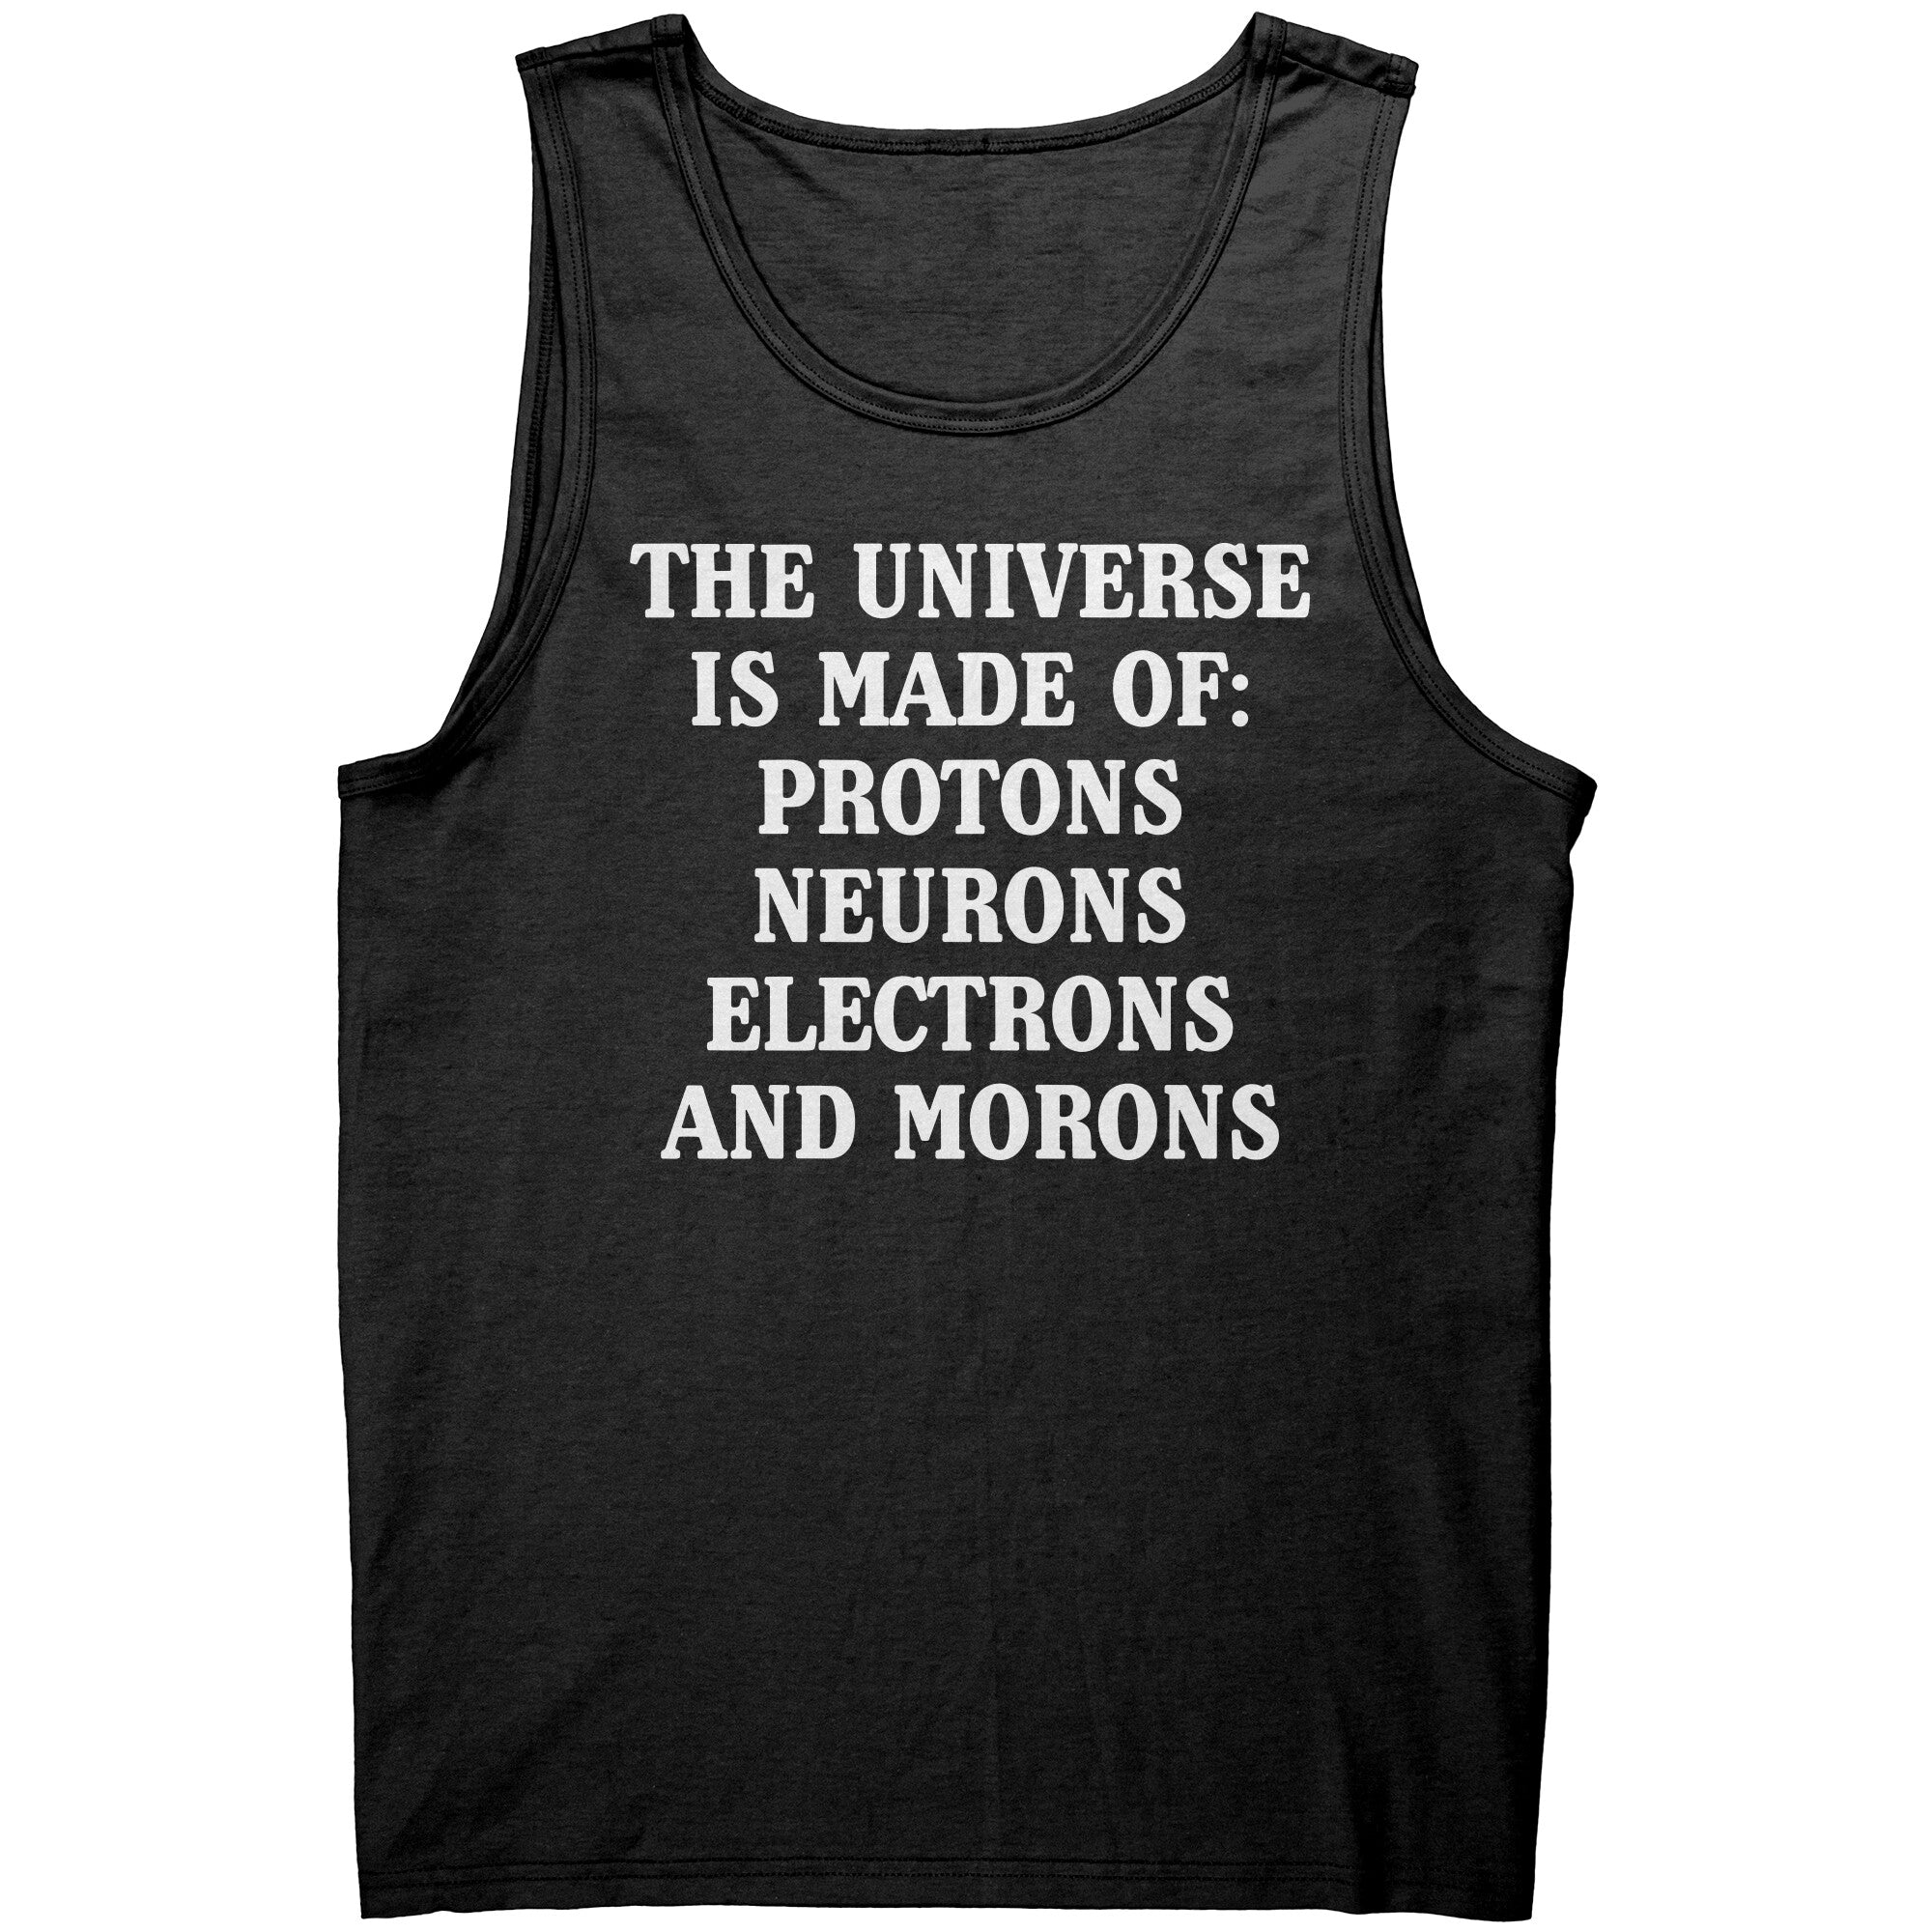 The Universe Is Made Of Protons, Neurons, Electrons, And Morons -Apparel | Drunk America 